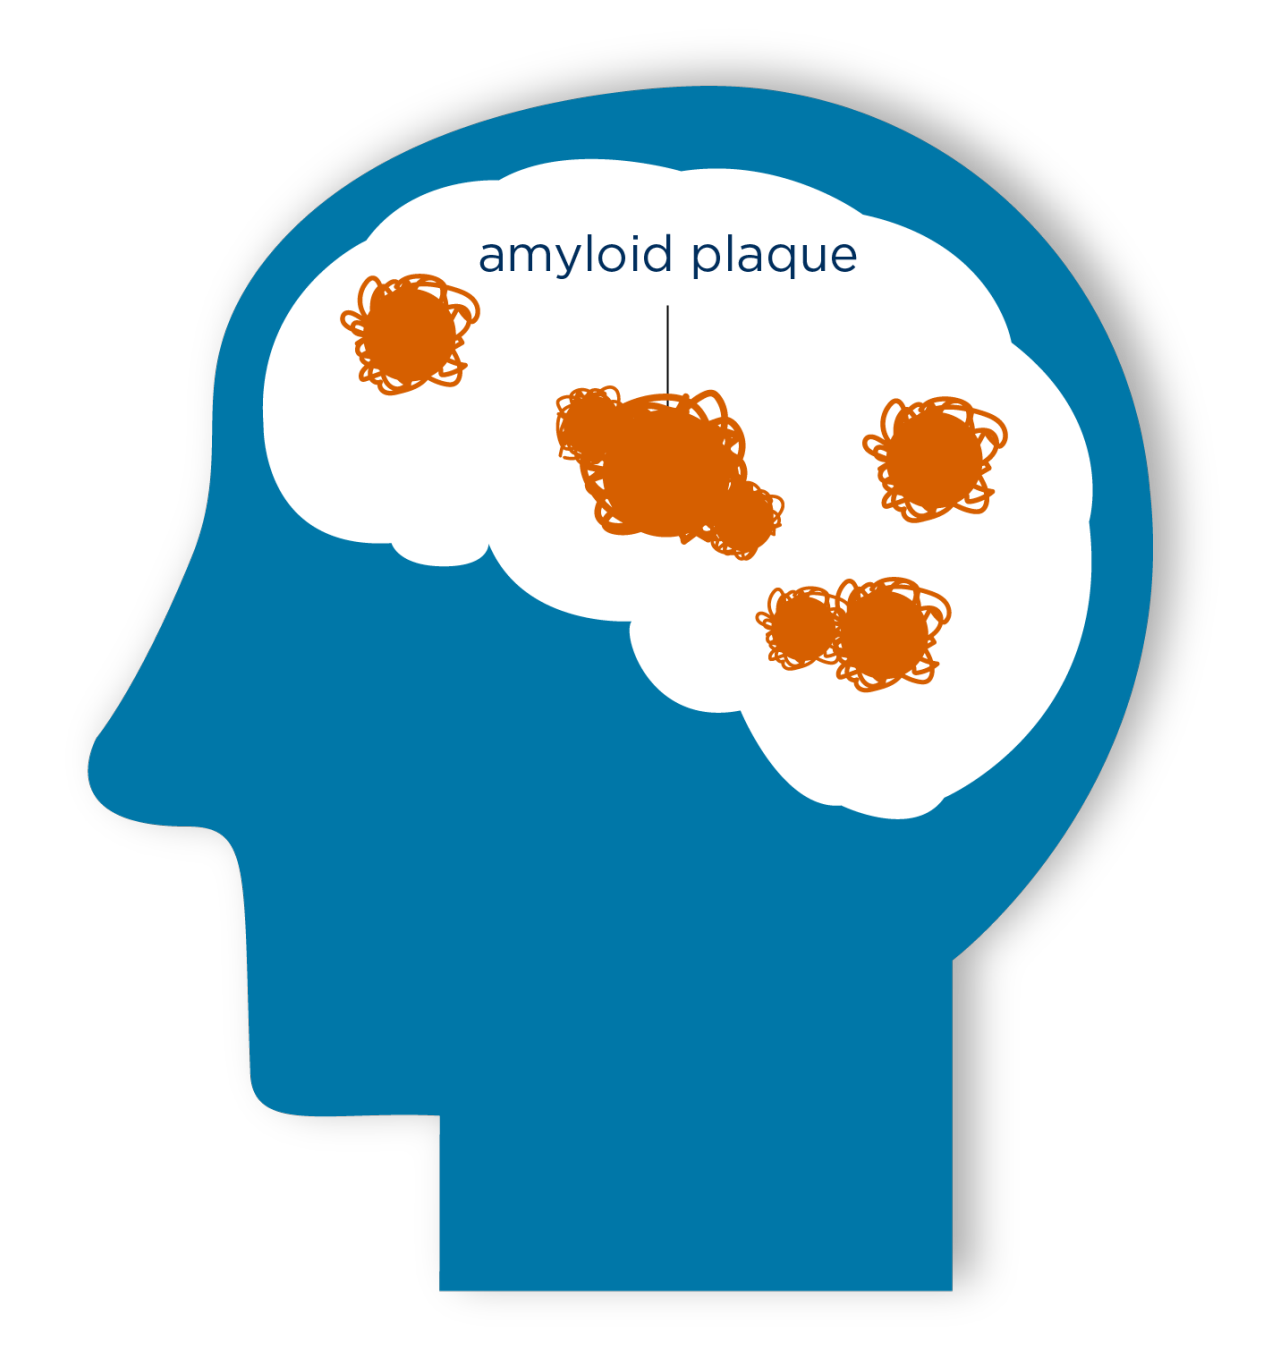 Illustration representing amyloid plaques building up in the brain